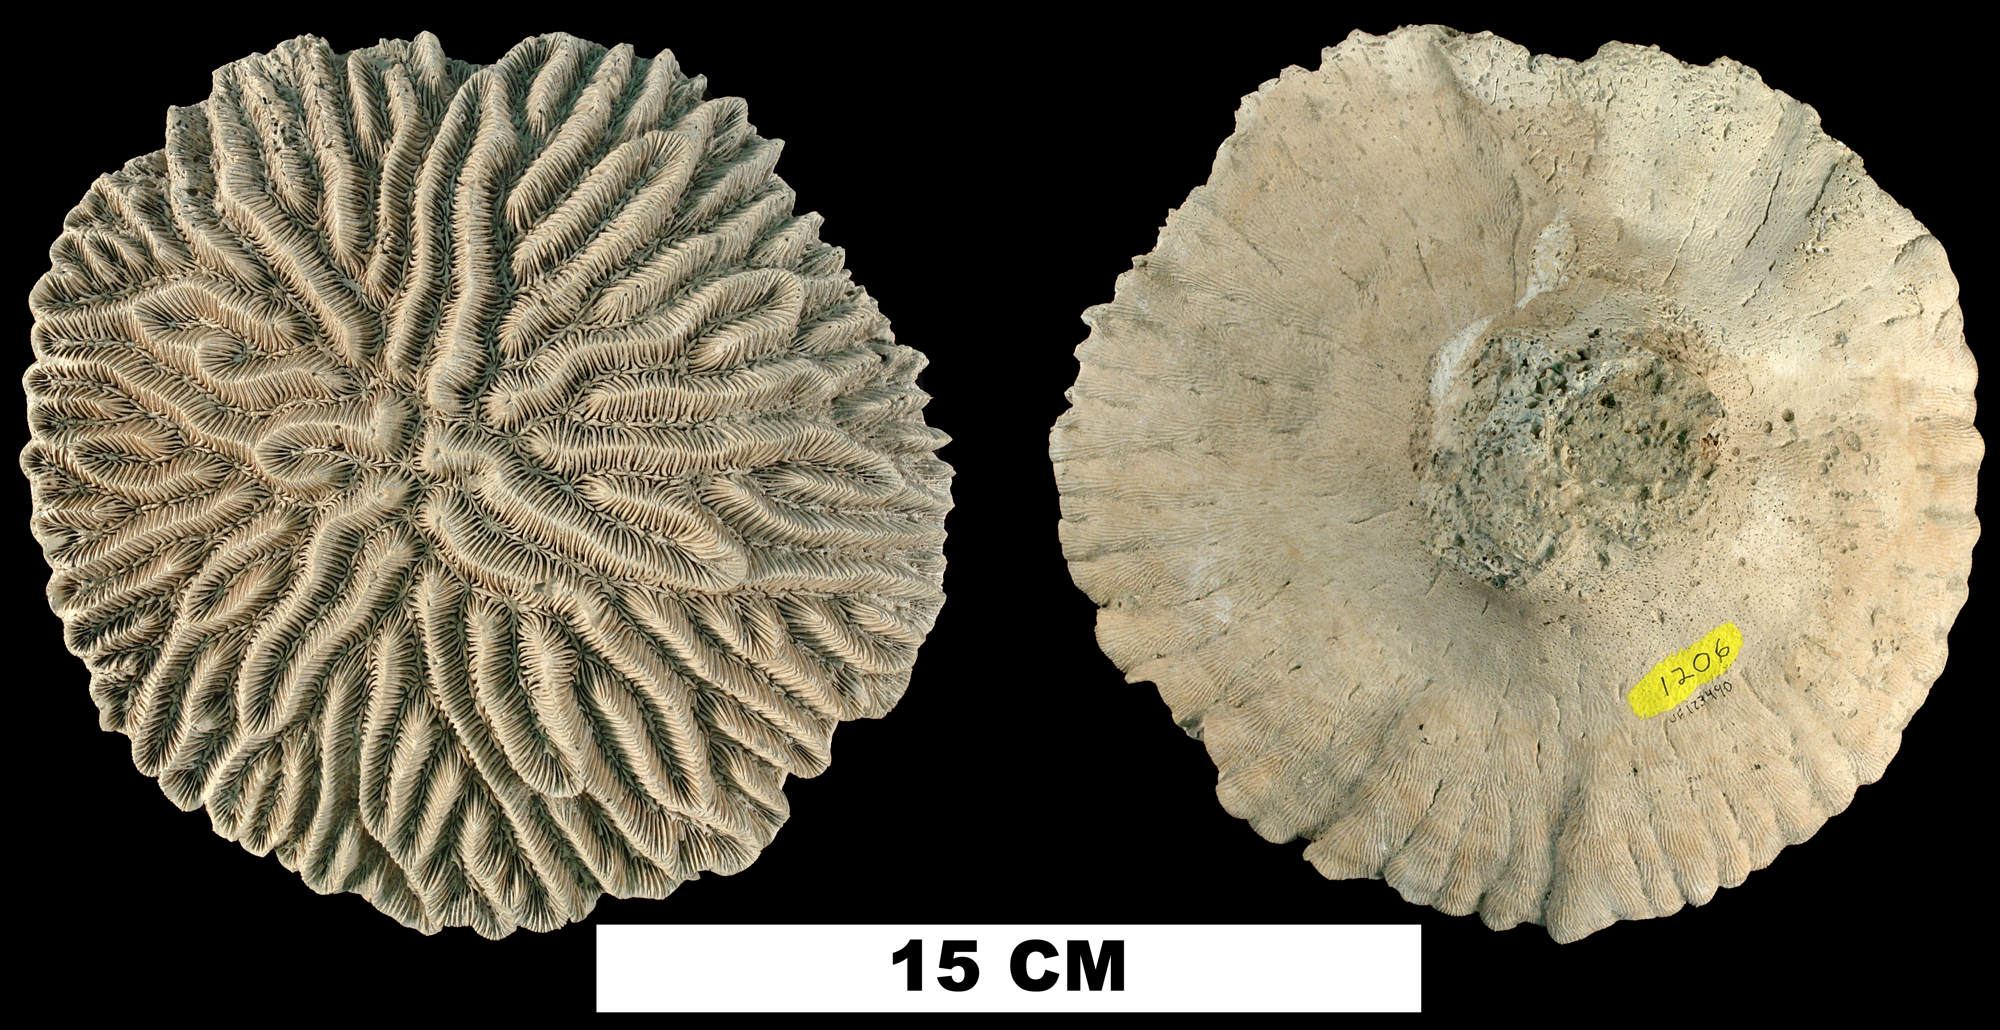 Photo showing two views of a brain coral specimen, one from the top and one from the bottom.